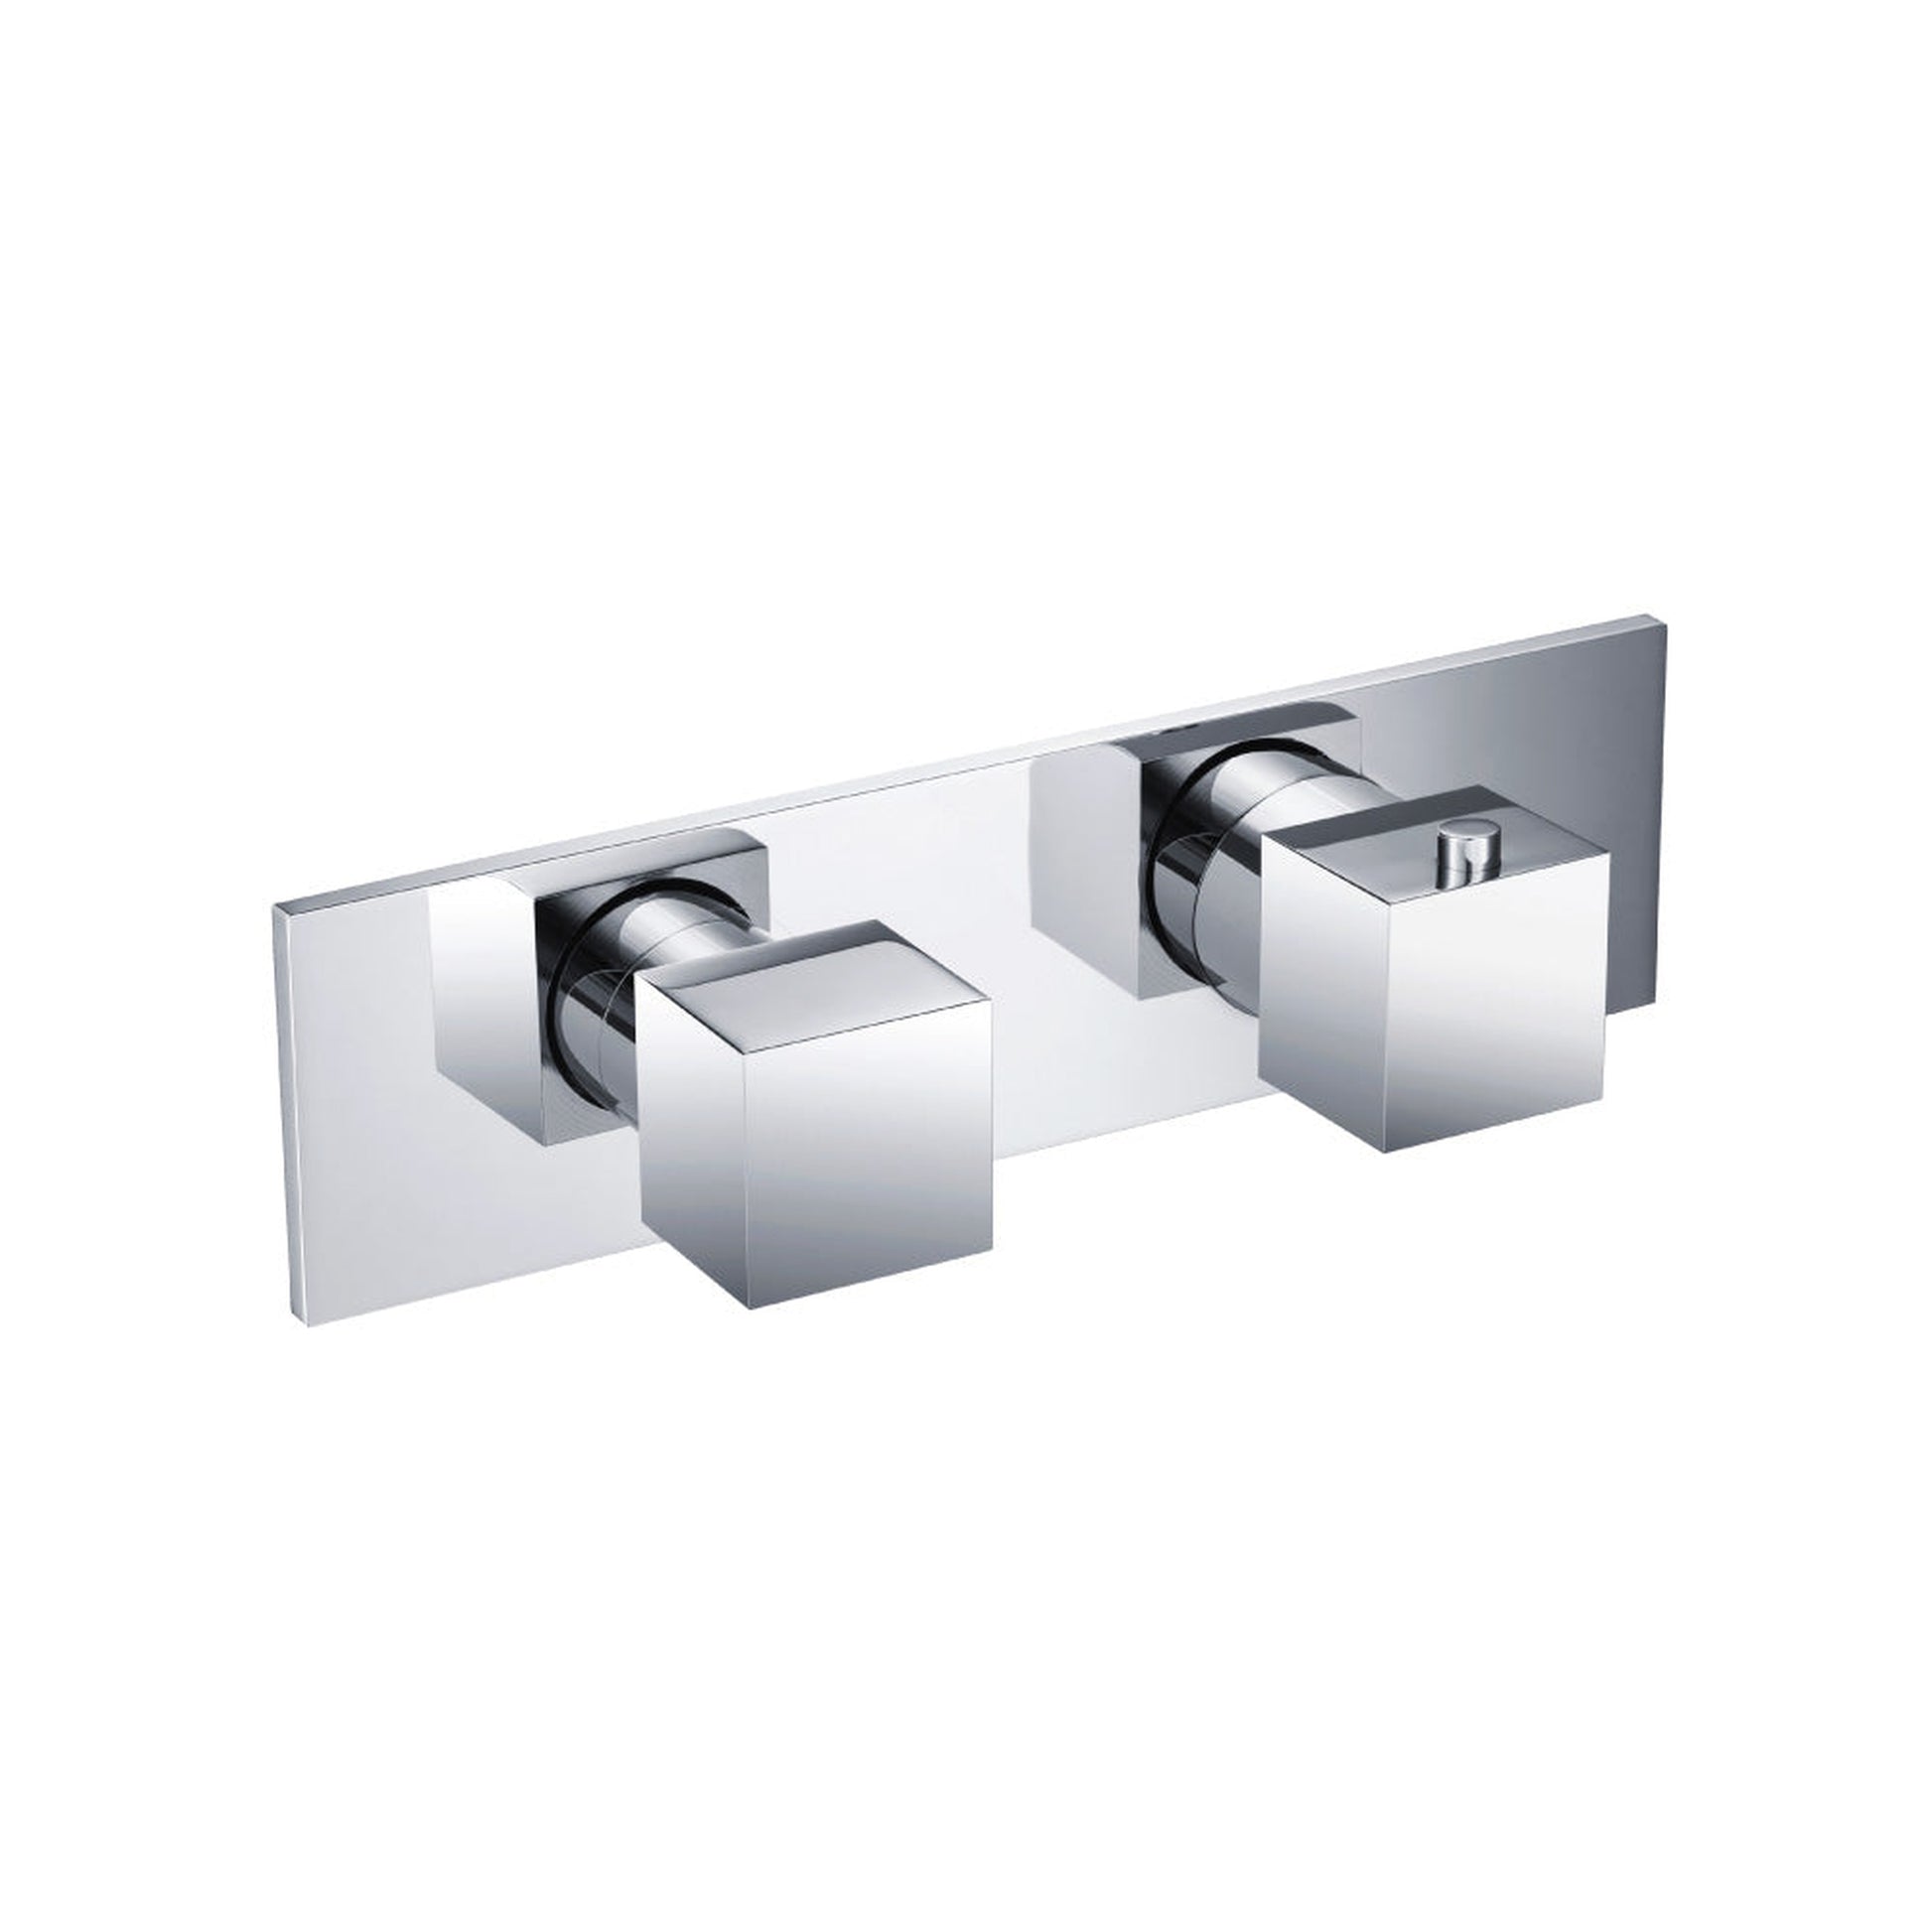 Isenberg Serie 160 Single Output Trim for Thermostatic Valve in Chrome